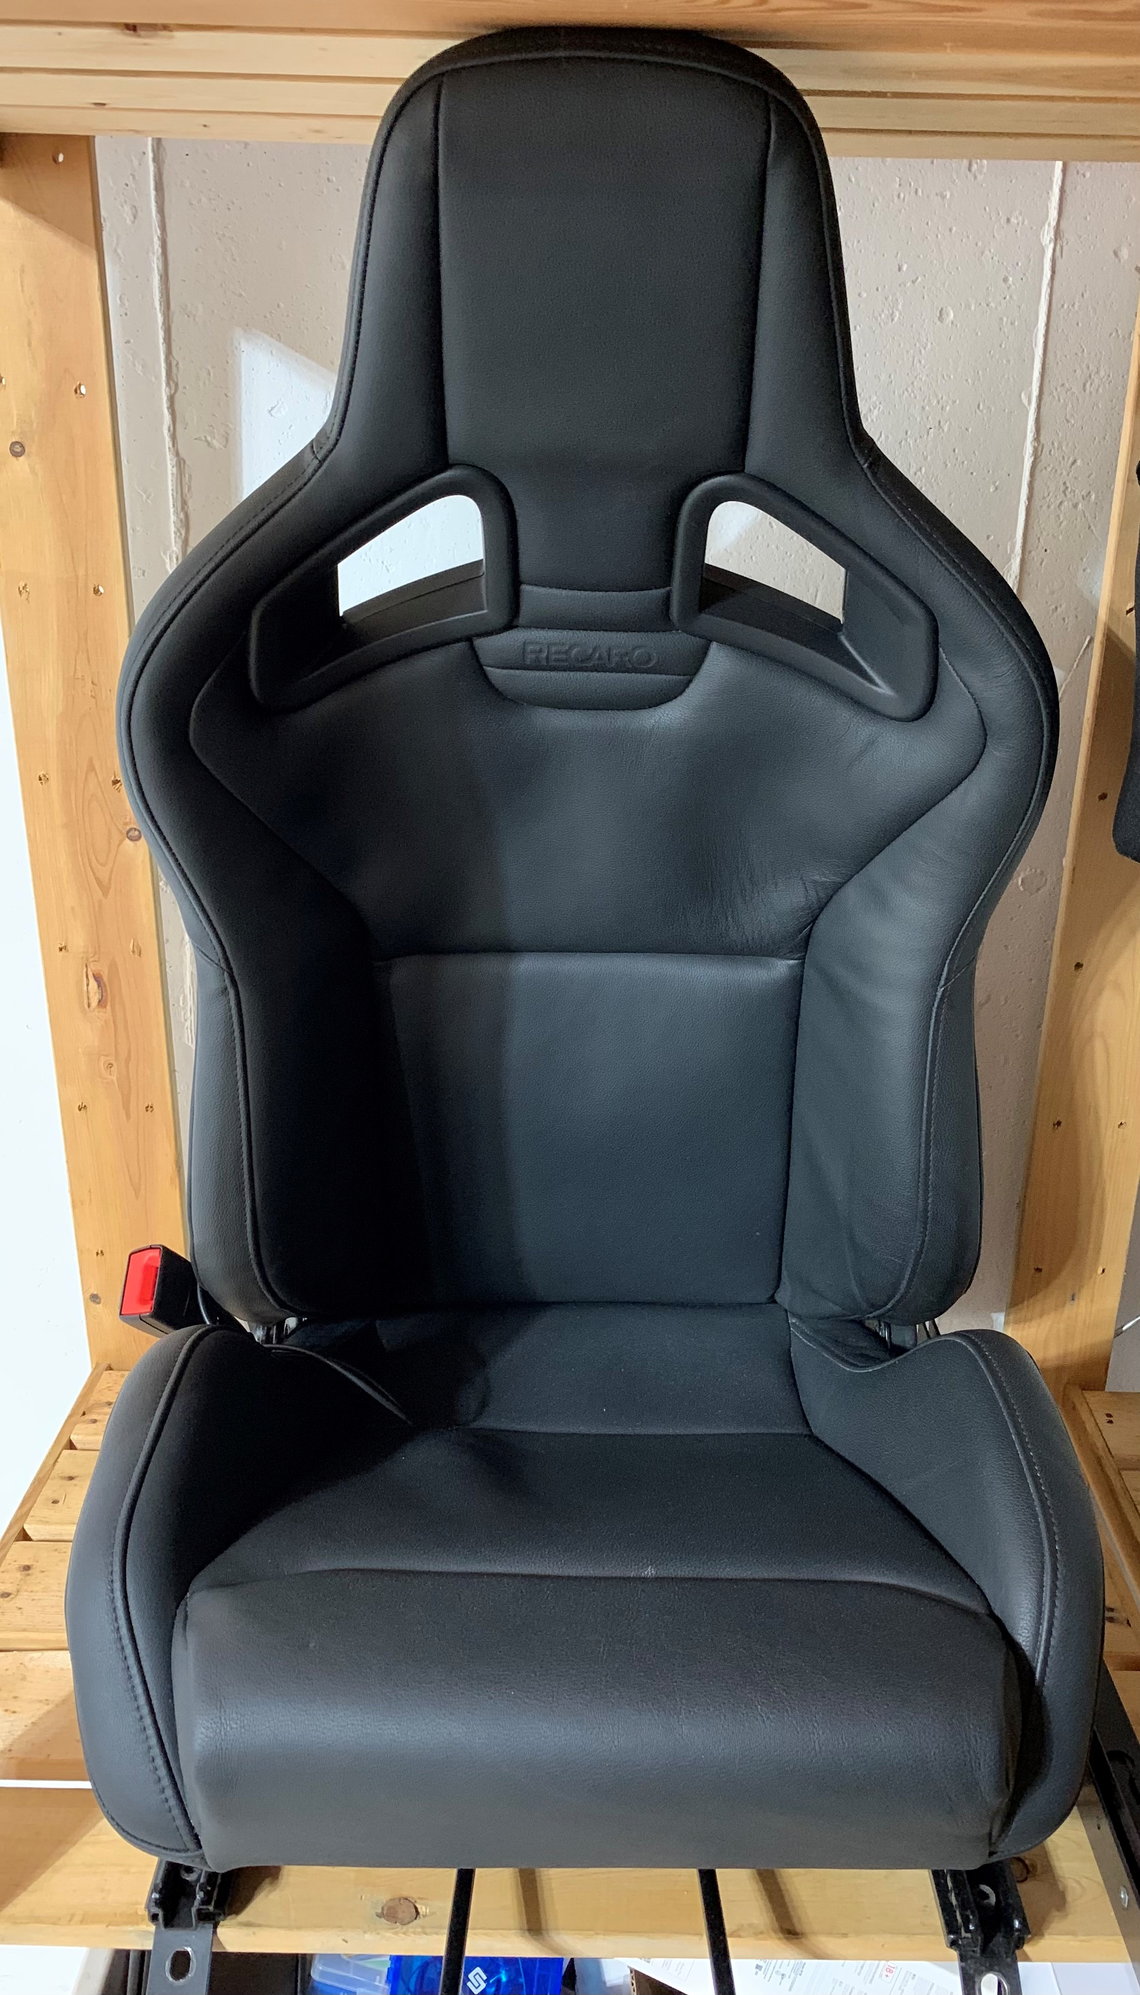 Interior/Upholstery - 997 folding reclining bucket seat (one) Recaro Sporster CS - local pickup only - Used - 2006 to 2021 Porsche 911 - Natick, MA 01760, United States